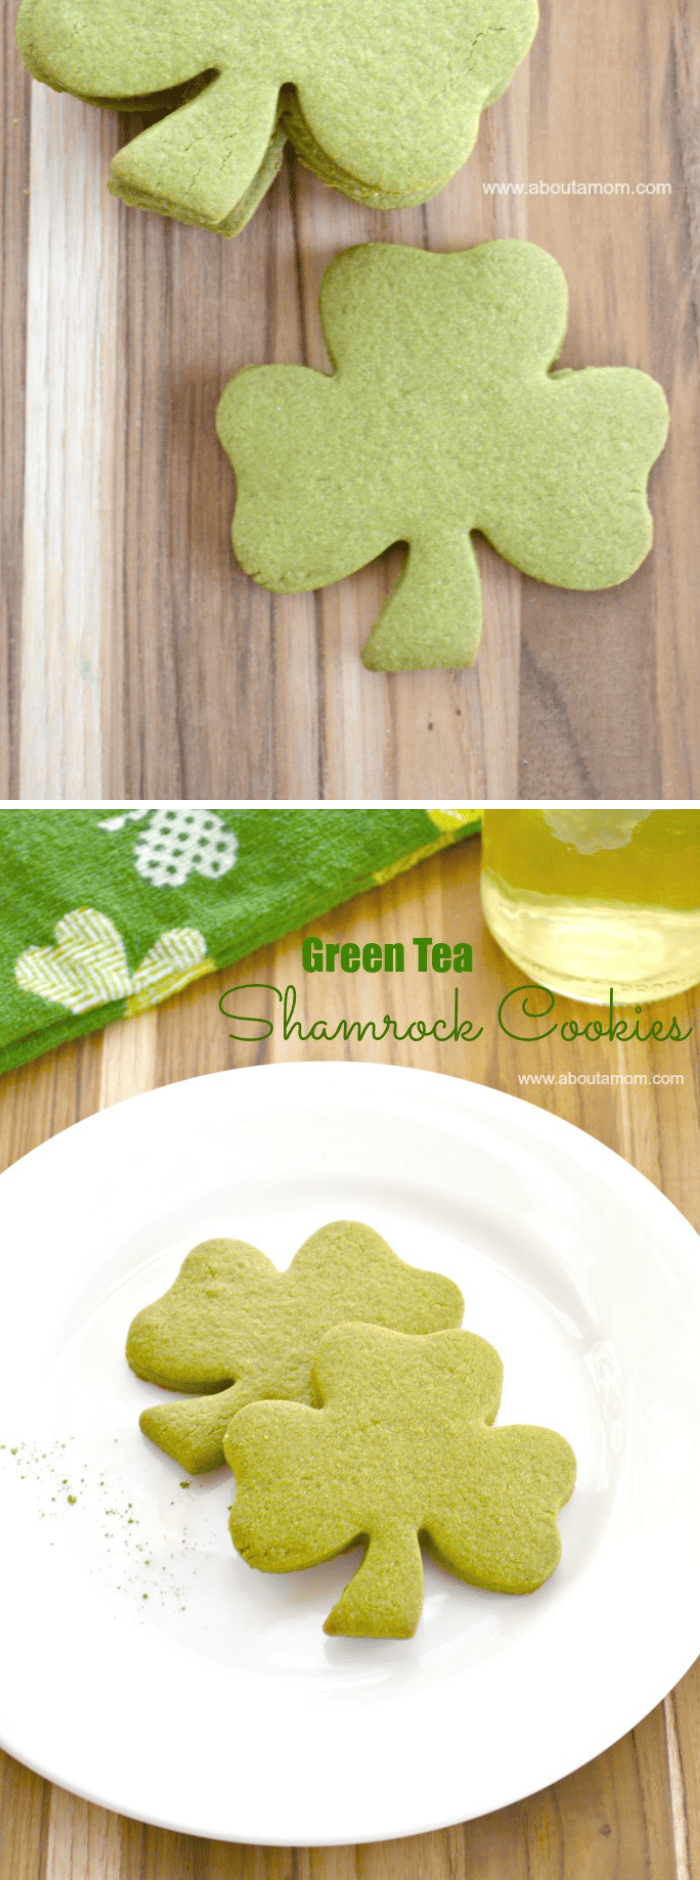 Matcha green tea powder gives Green Tea Shamrock Cookies their beautiful green color. Loaded with antioxidants, green tea is a healthy ingredient for St. Patrick's Day cookies.